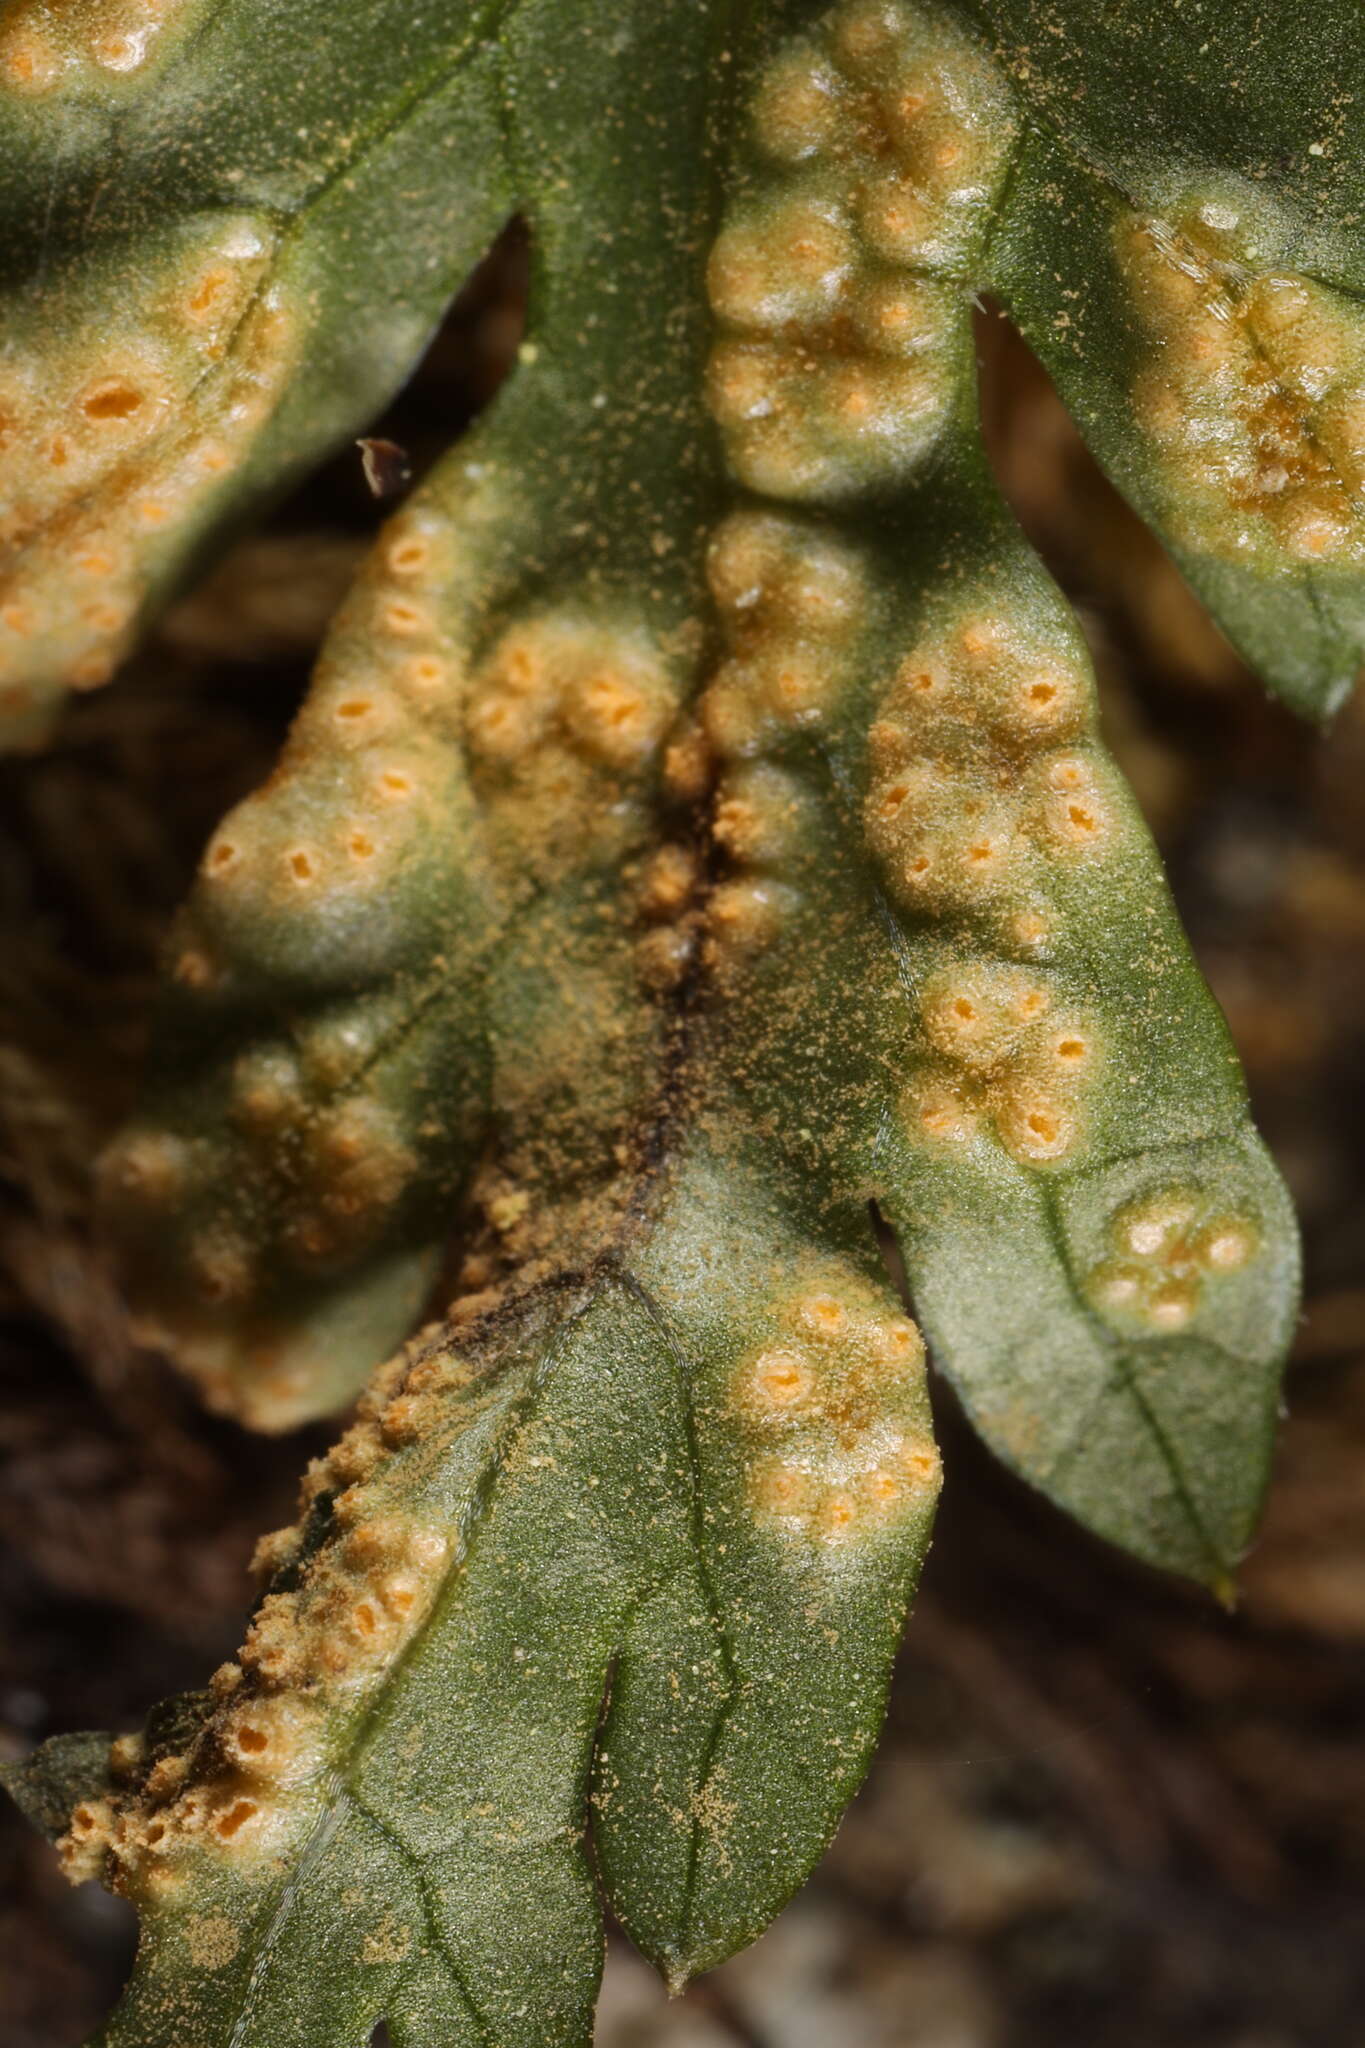 Image of Puccinia pimpinellae (F. Strauss) Link 1824